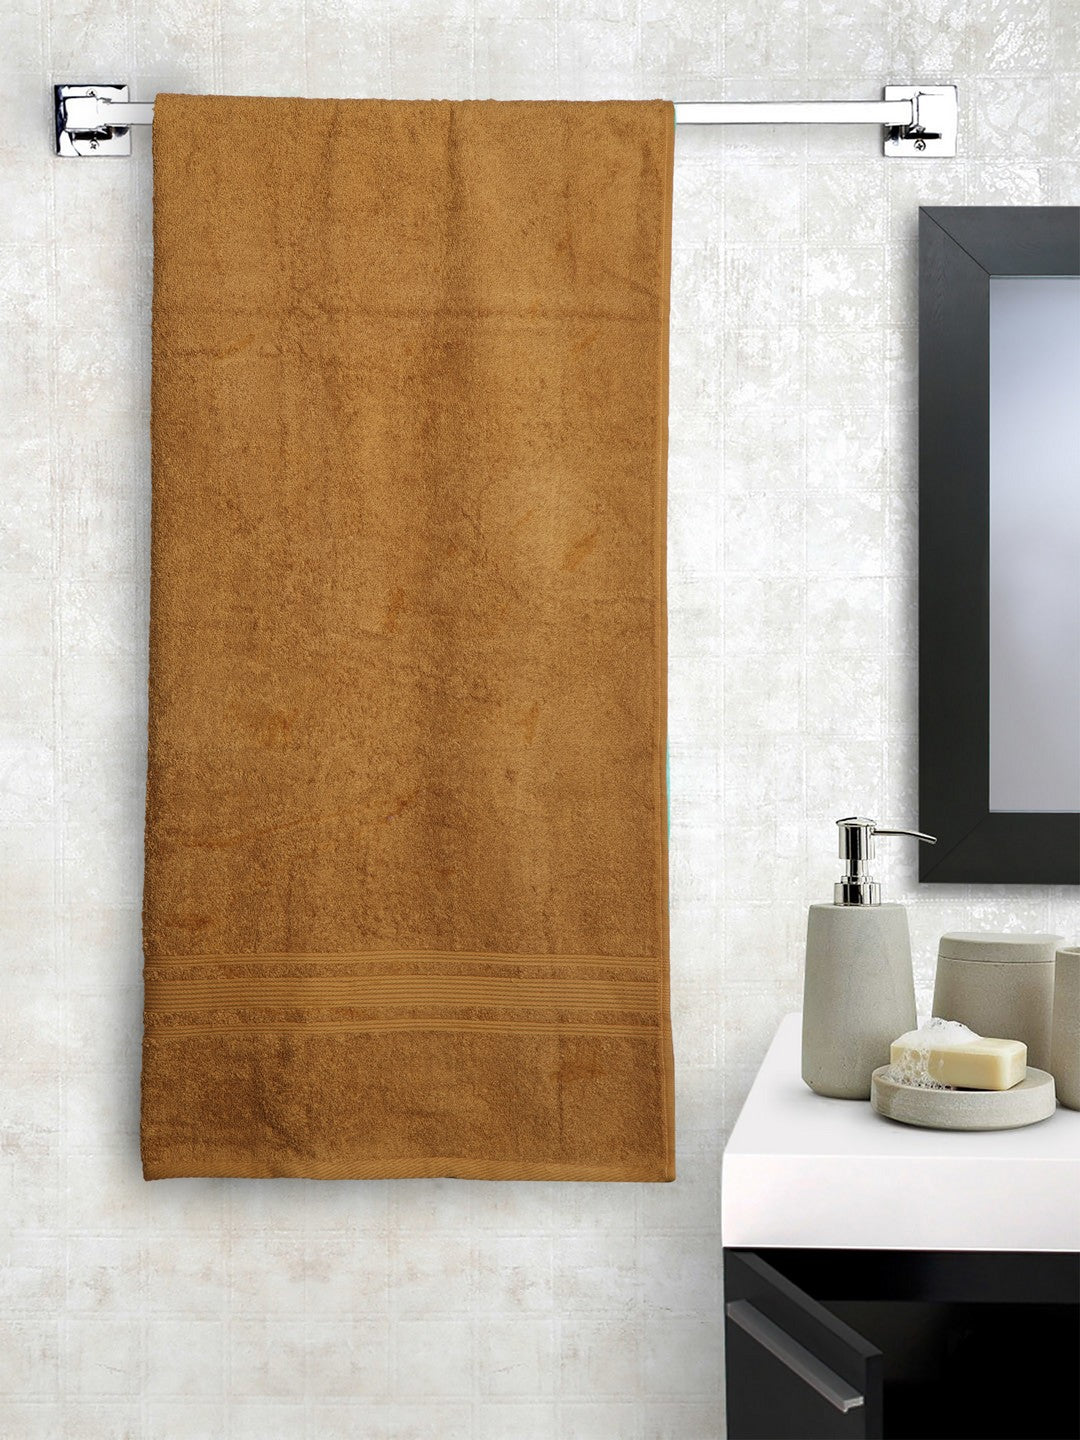 Lushomes Towels for Bath, Olive Brown Super Soft and Fluffy Bath Turkish Towel (Size 35 x 71 inches, Single Pc, 450GSM)